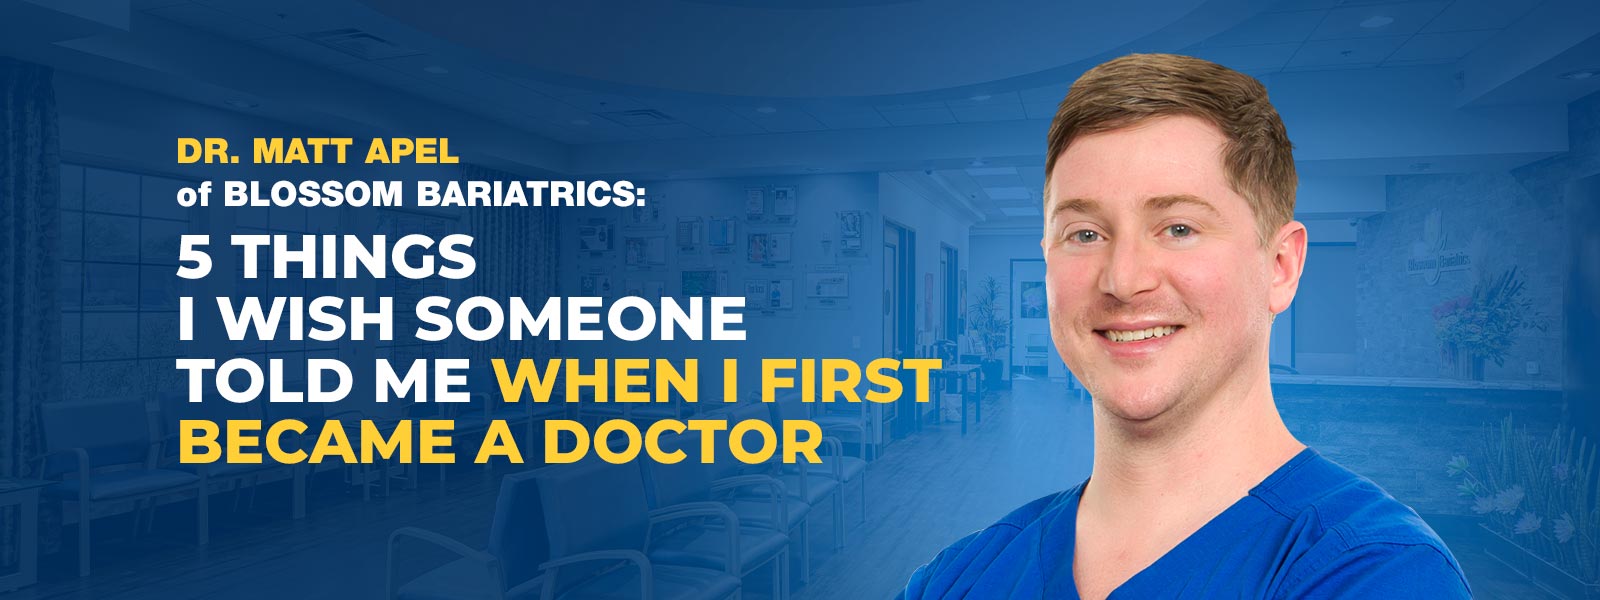 Dr Matt Apel of Blossom Bariatrics: 5 Things I Wish Someone Told Me When I First Became A Doctor